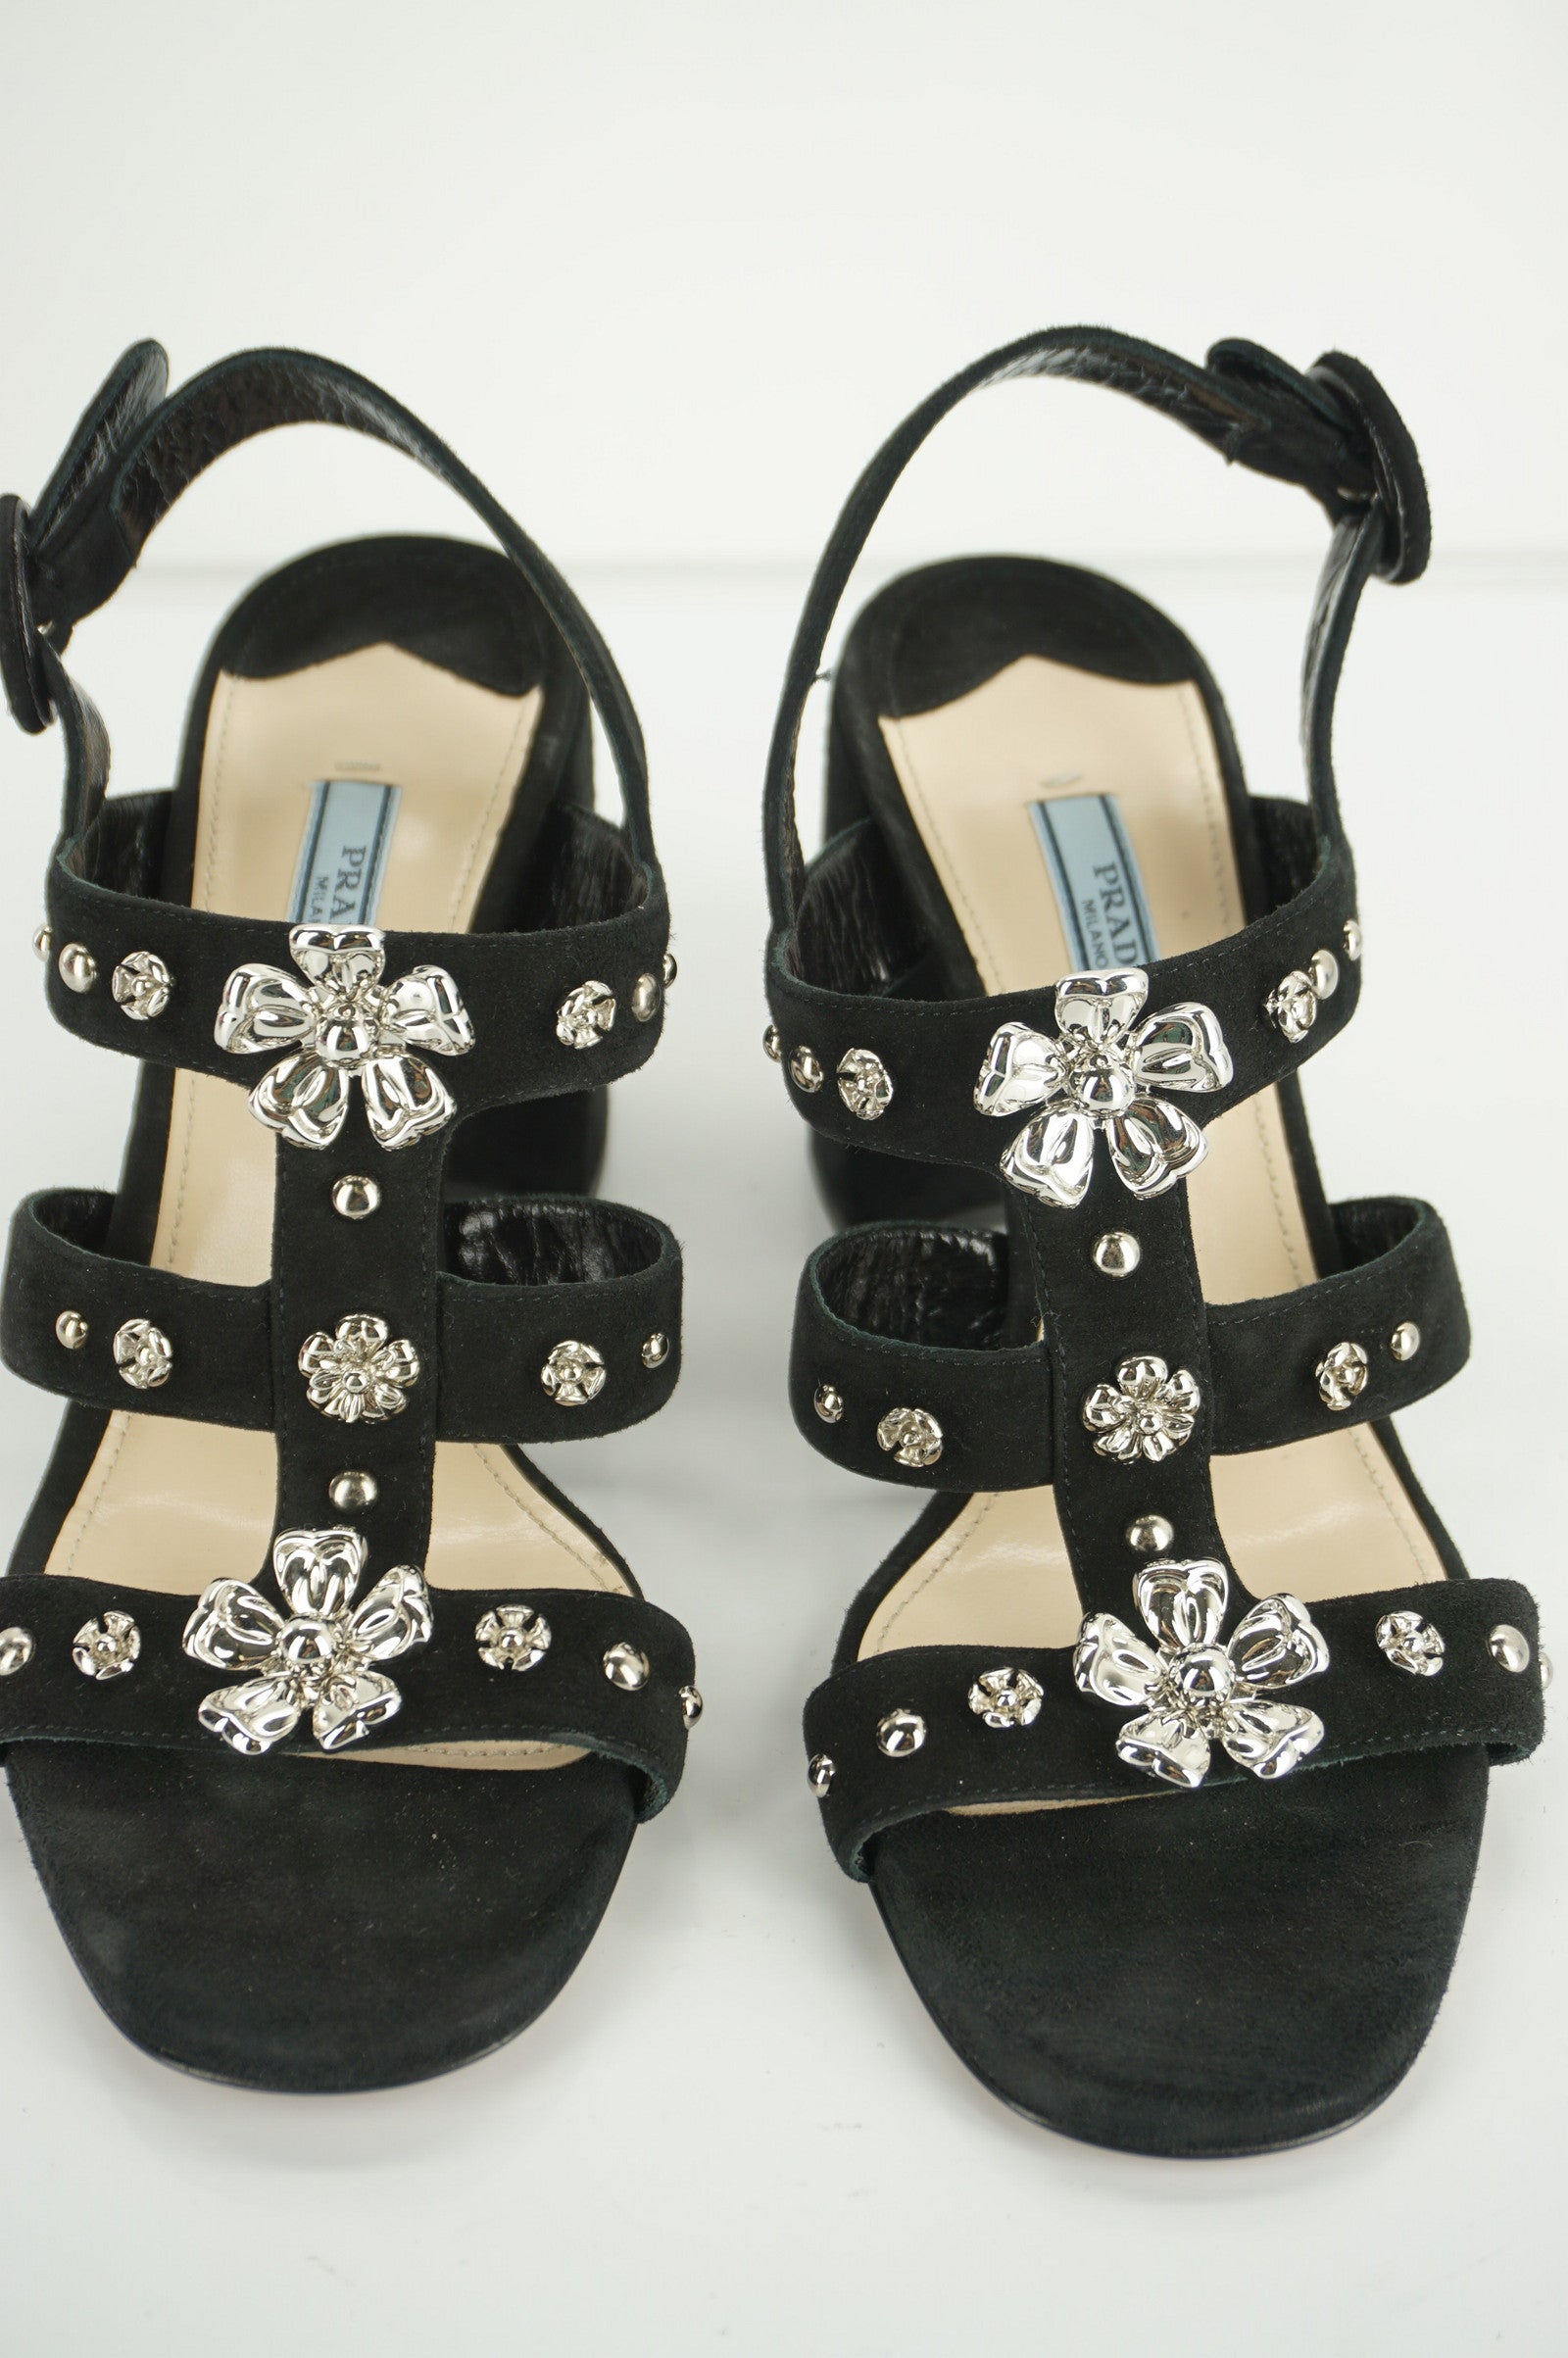 Prada Black Suede Silver Flower Studded Caged Strappy Sandals Size 38 $750 New